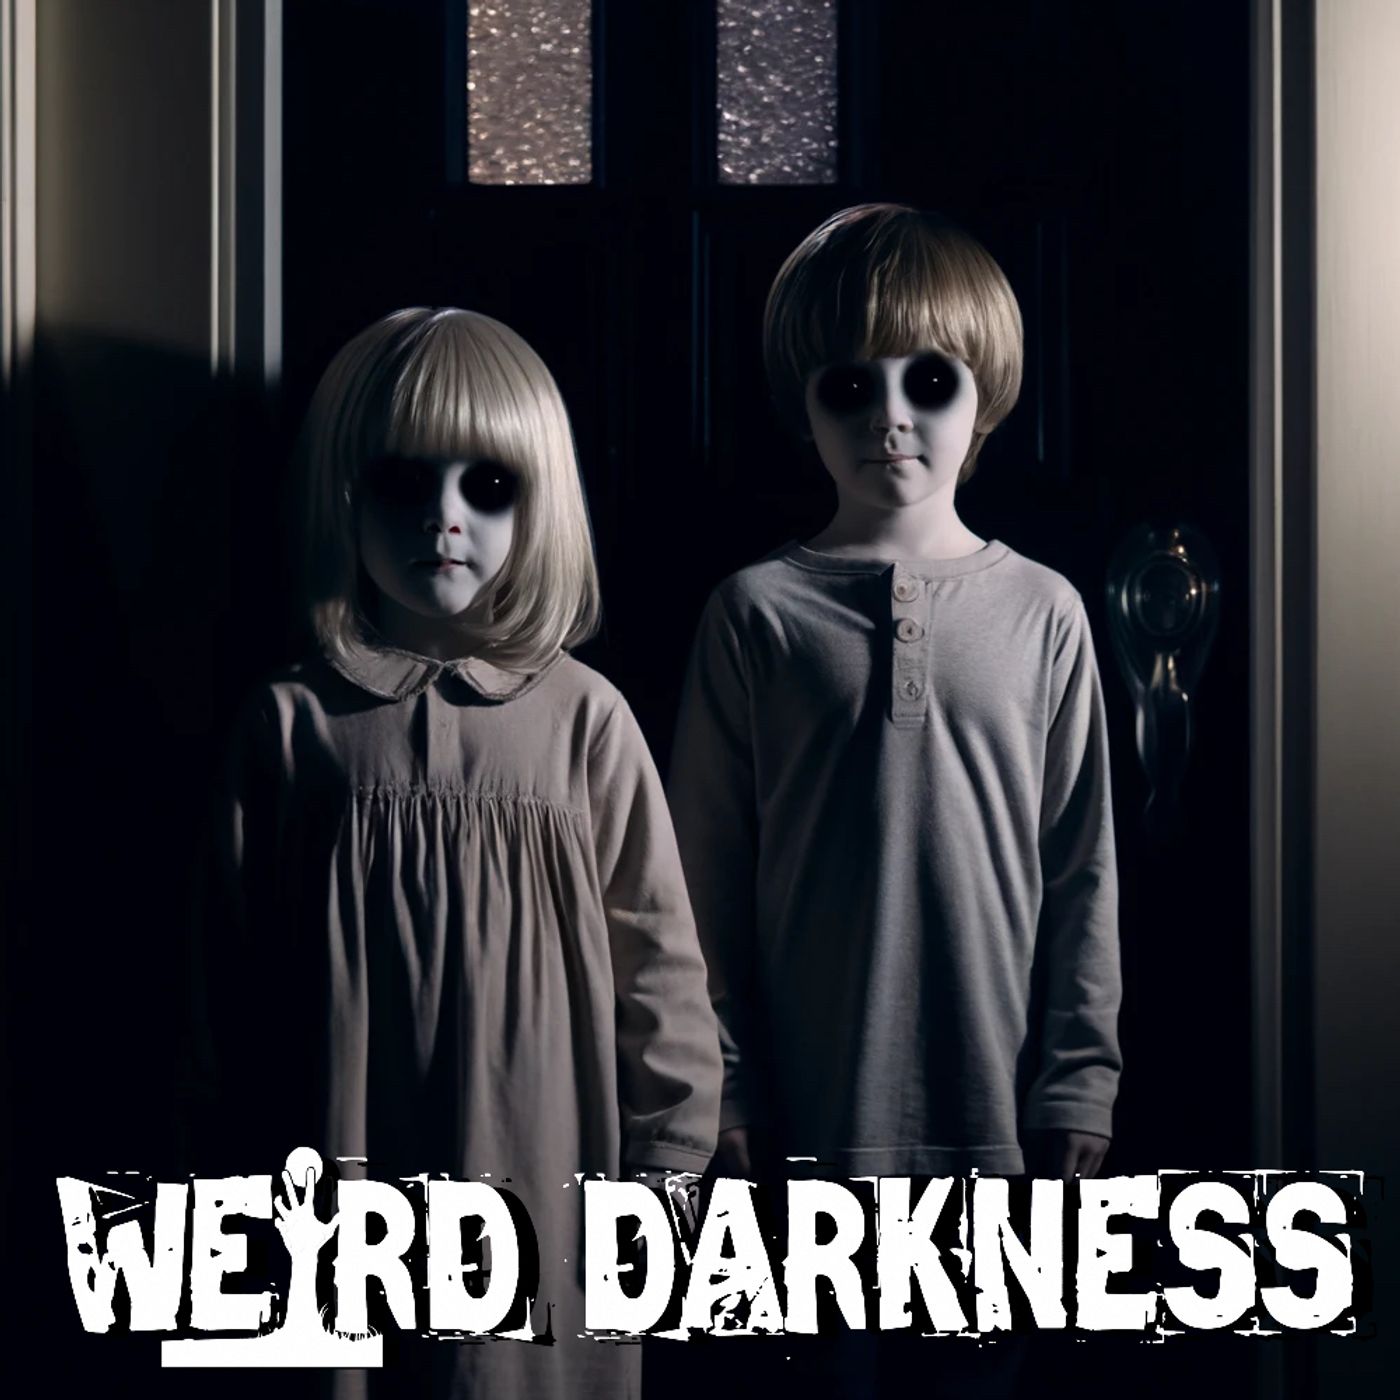 “INVASION OF THE BLACK-EYED KIDS and More Terrifying True Horrors! #WeirdDarkness